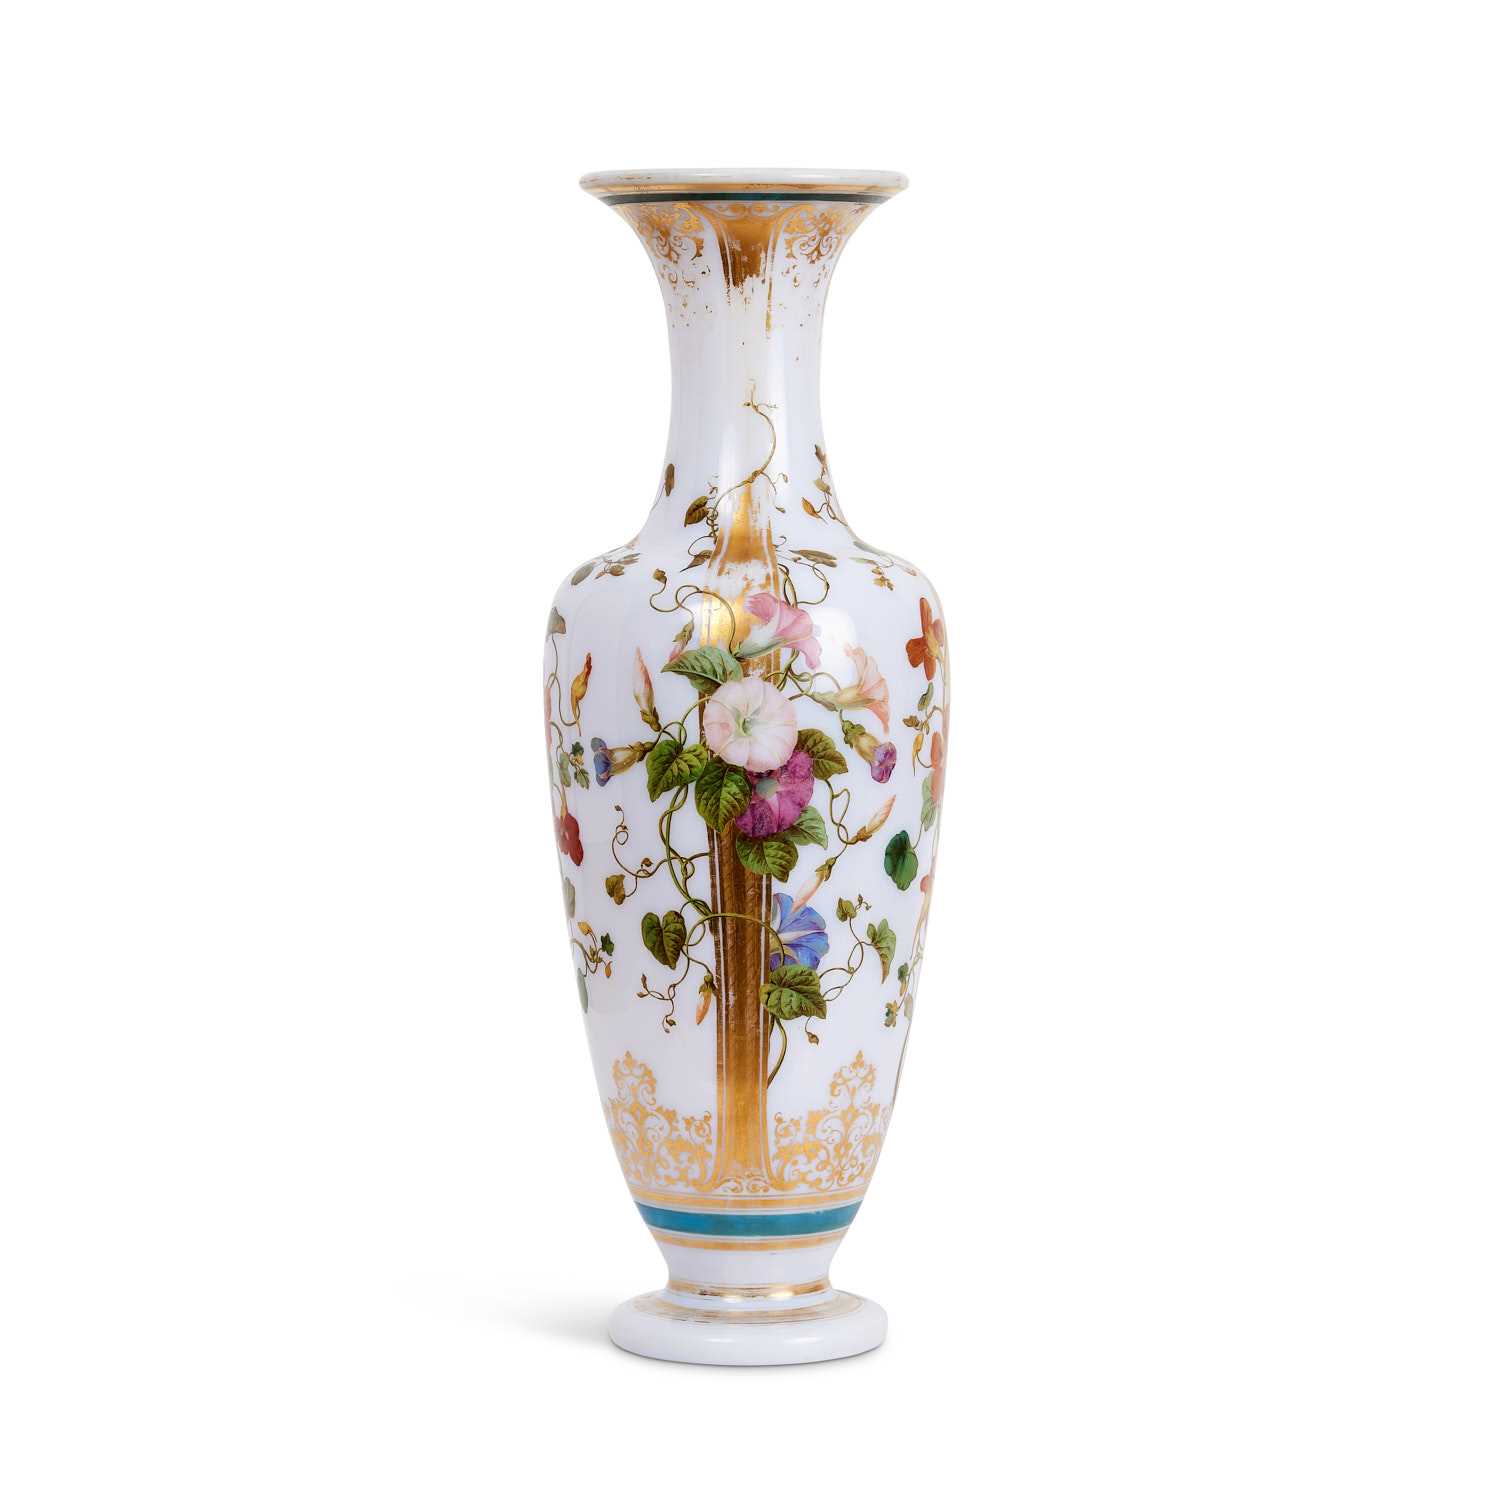 ATTRIBUTED TO BACCARAT: A MID 19TH CENTURY OPALINE GLASS VASE DECORATED WITH FLOWERS - Image 2 of 3